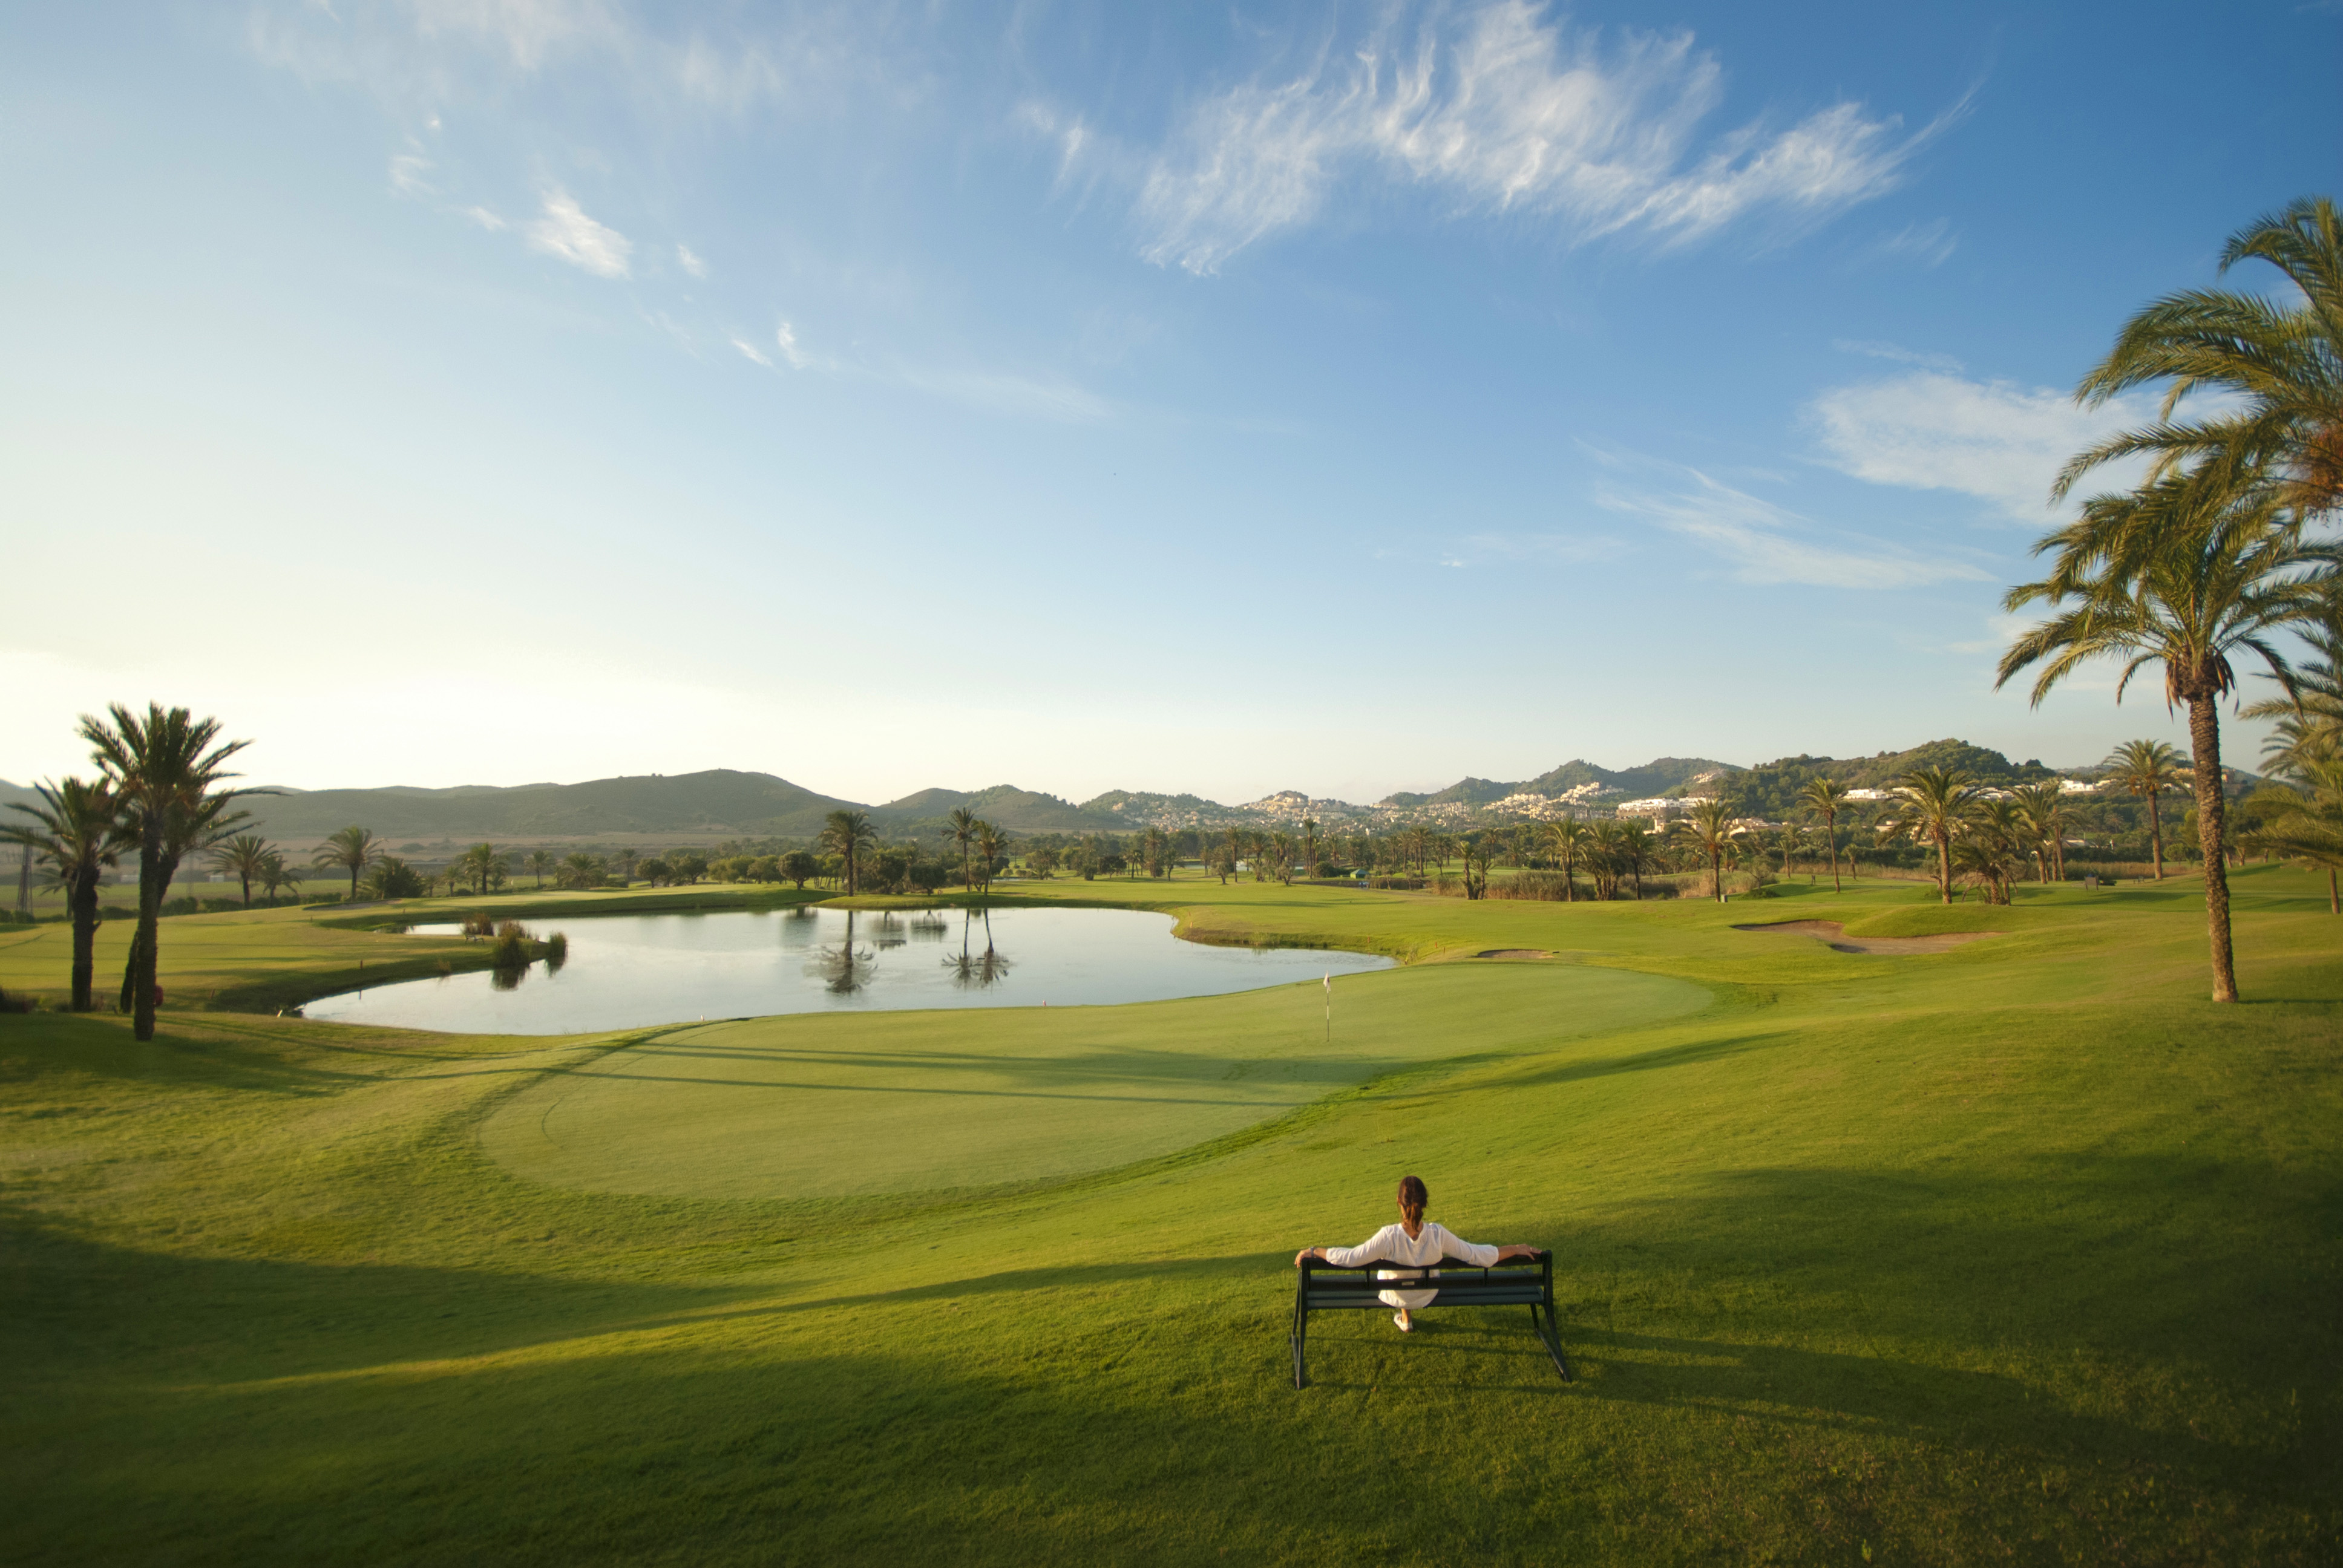 La Manga Club bought by Hesperia Investment Group